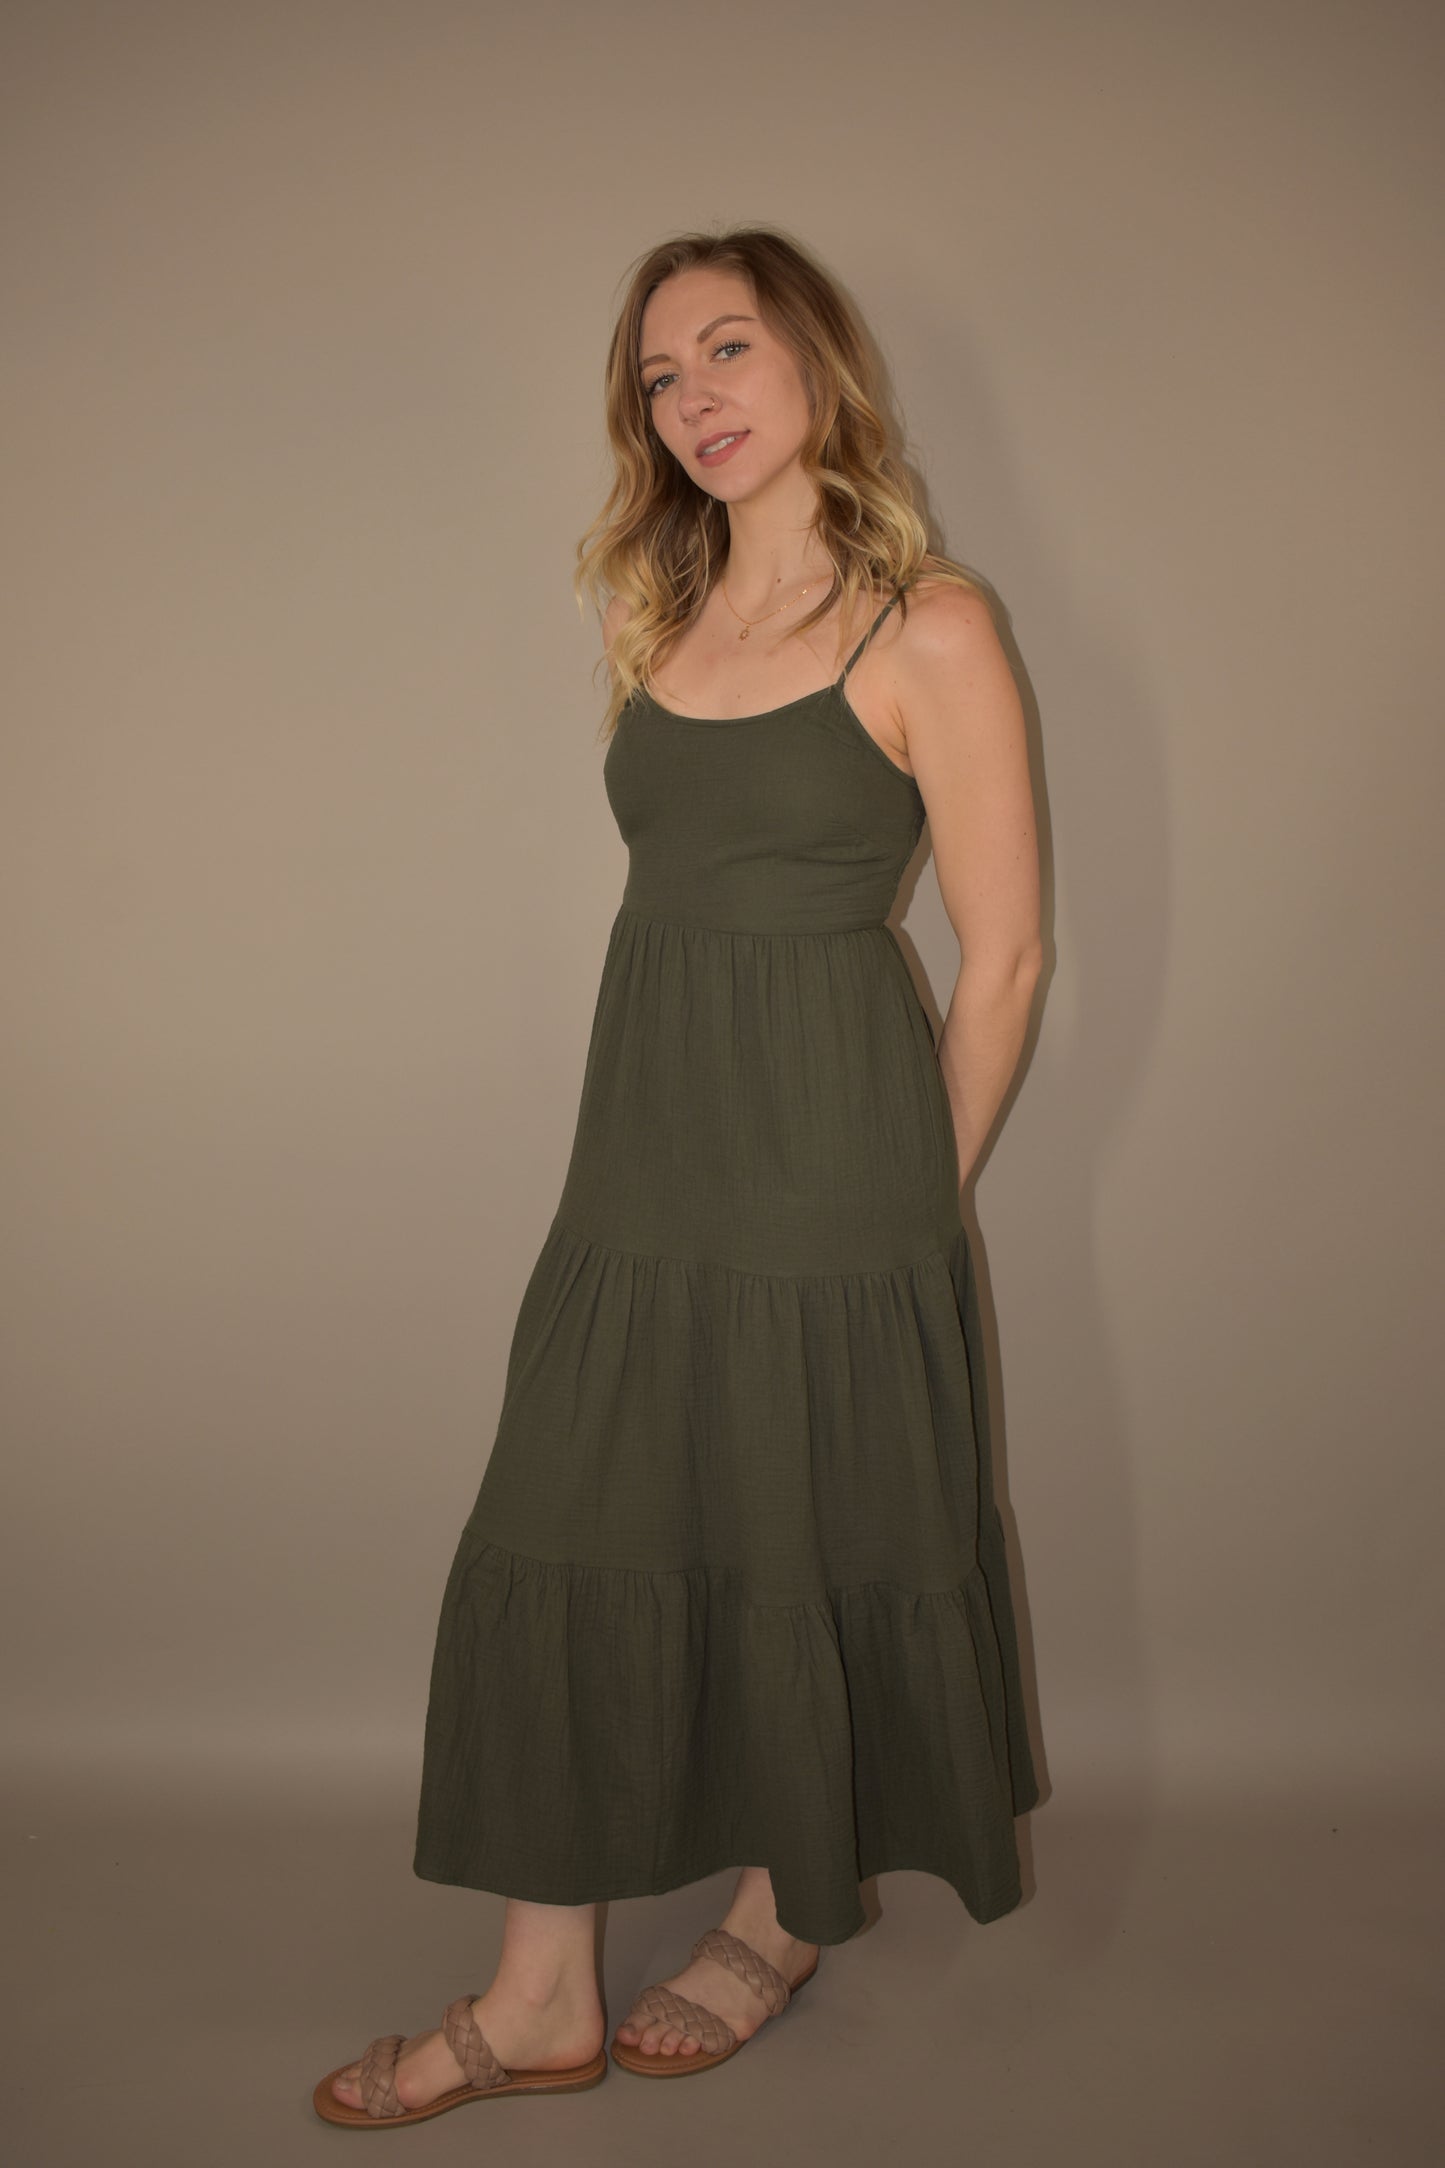 Tiered midi spaghetti strap dress. olive green. lightweight fabric. adjustable straps. flowy but fitted bodice.  smocked/ stretchy back.   